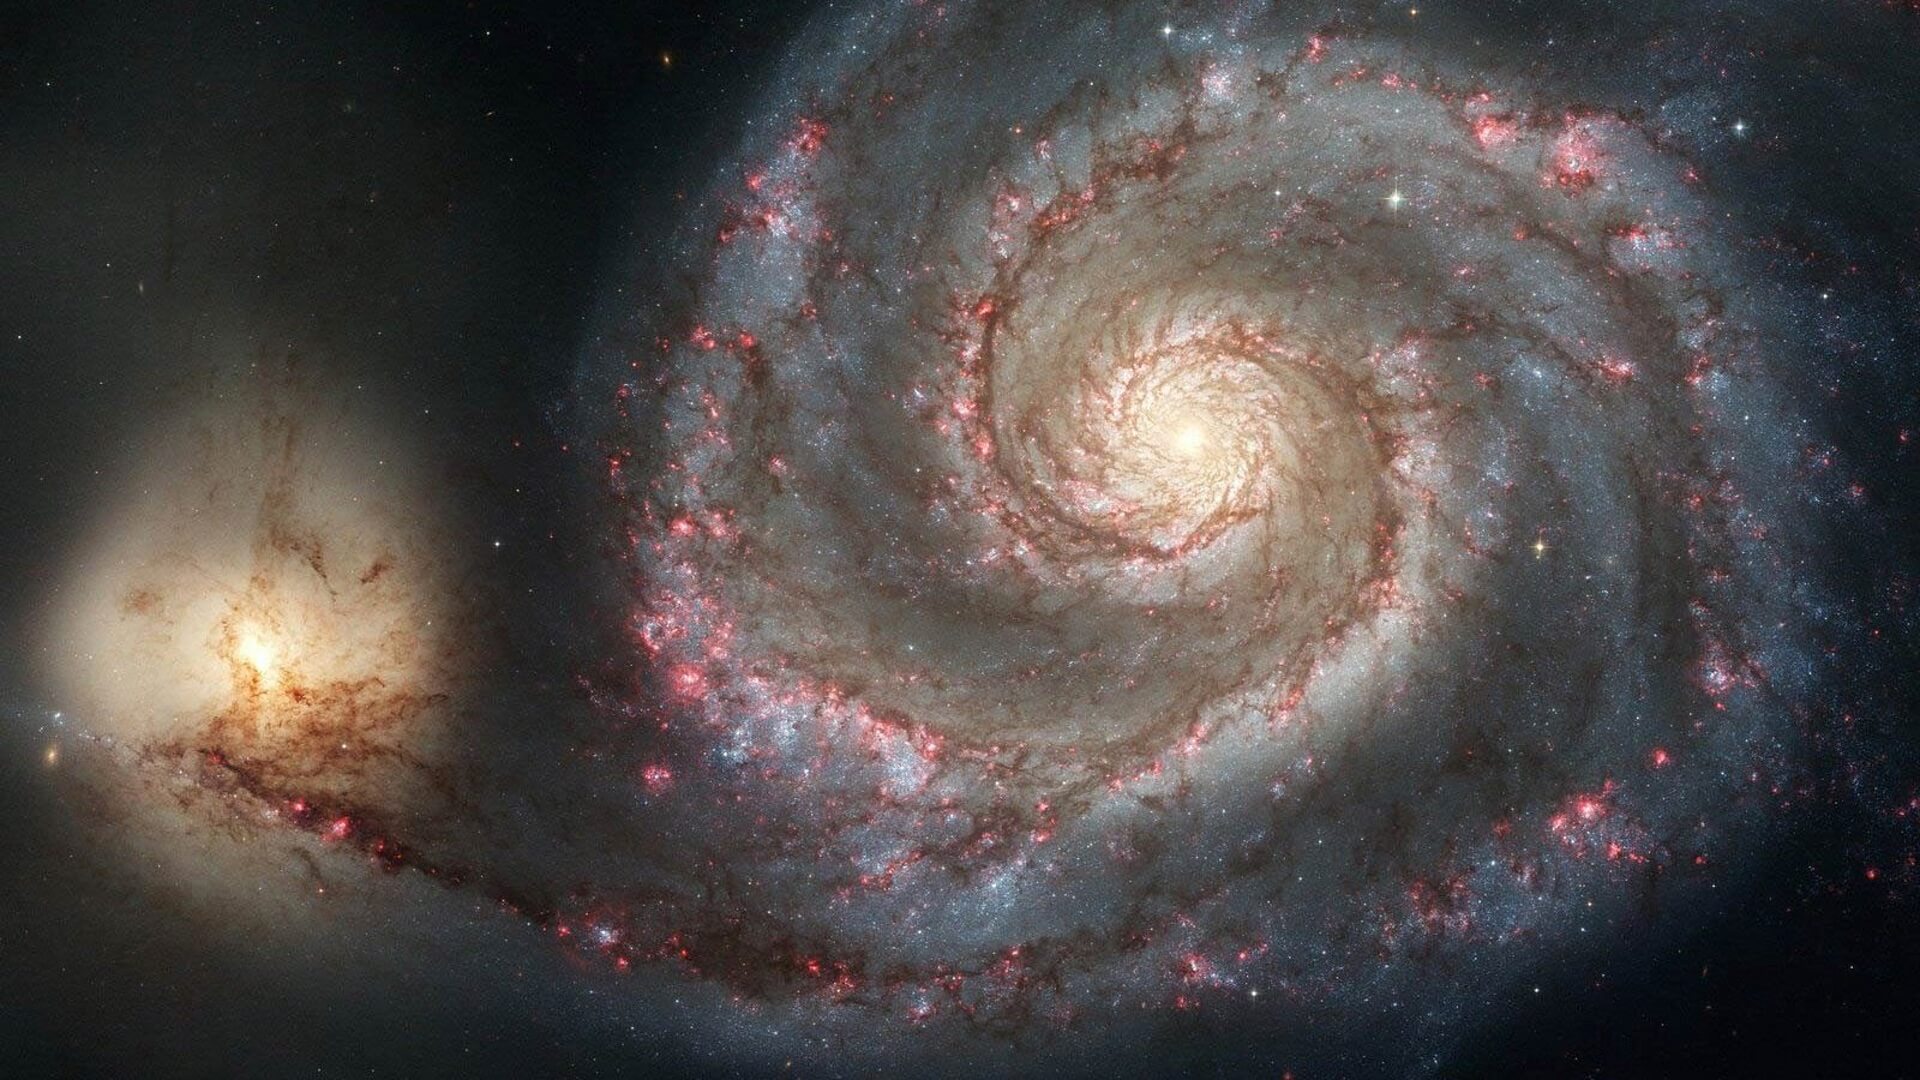 Why are some galaxies spiral shaped?